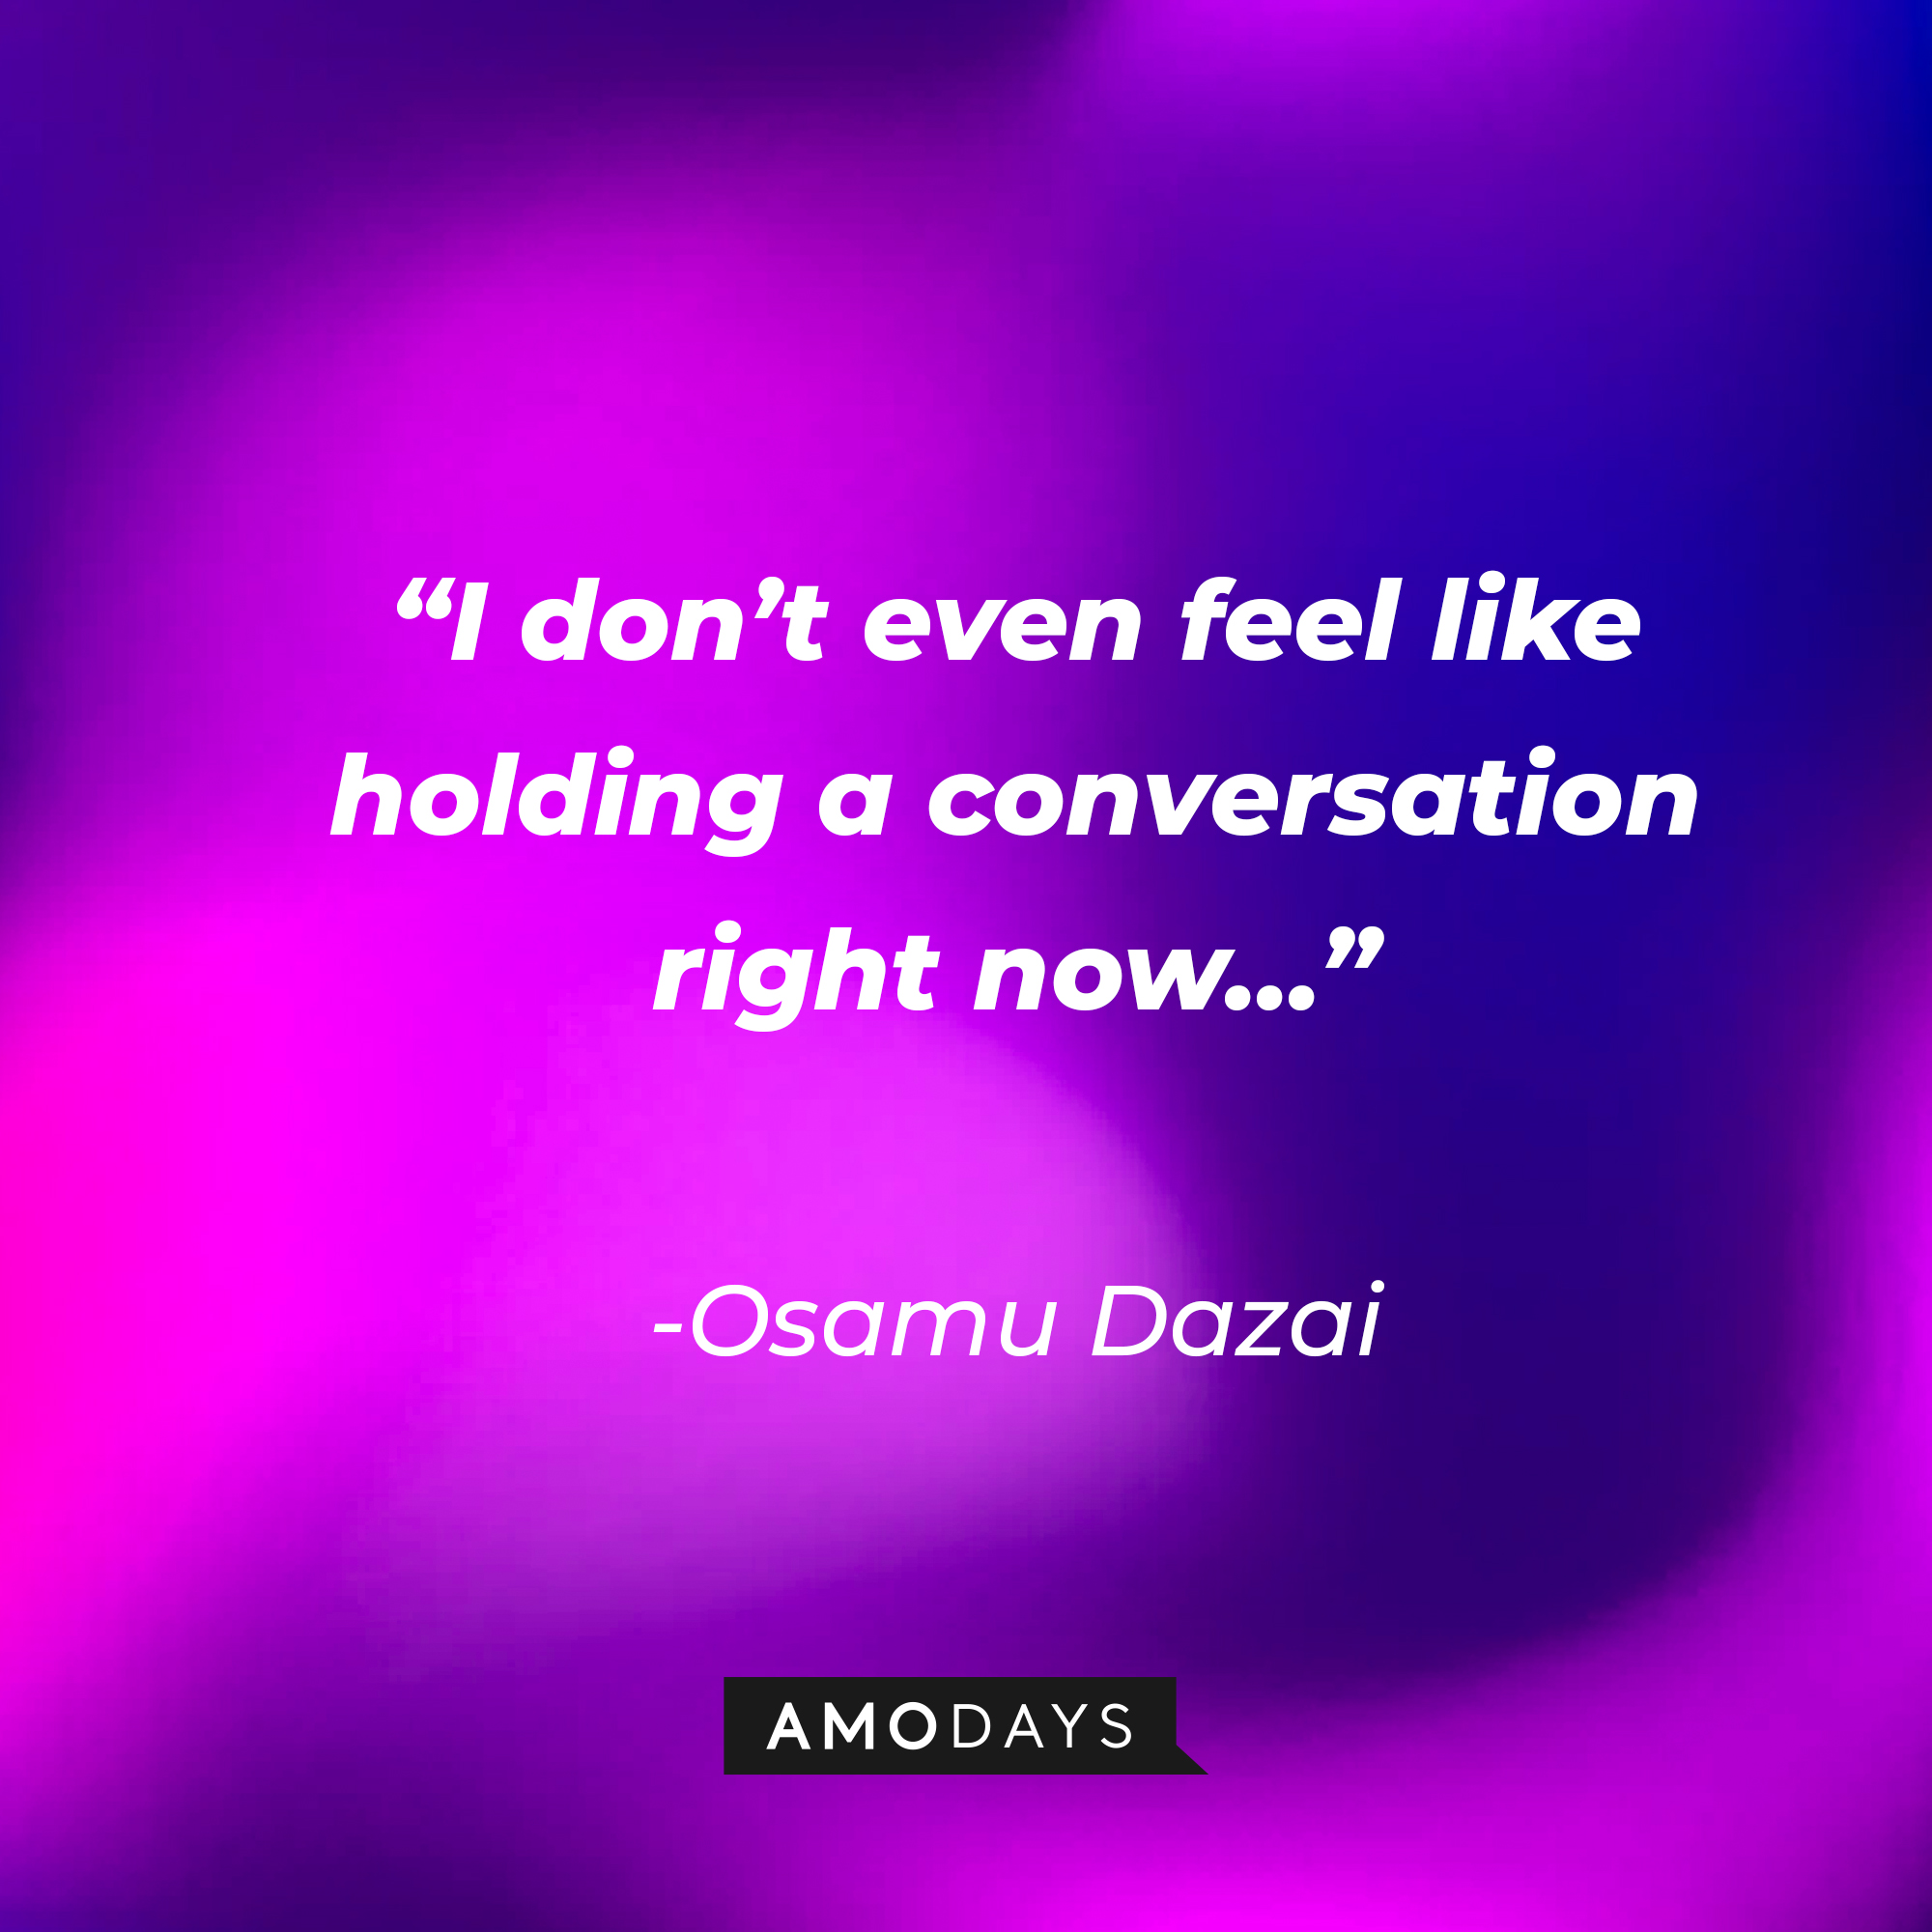 Osamu Dazai’s quote: “I don’t even feel like holding a conversation right now…” | Source: AmoDays